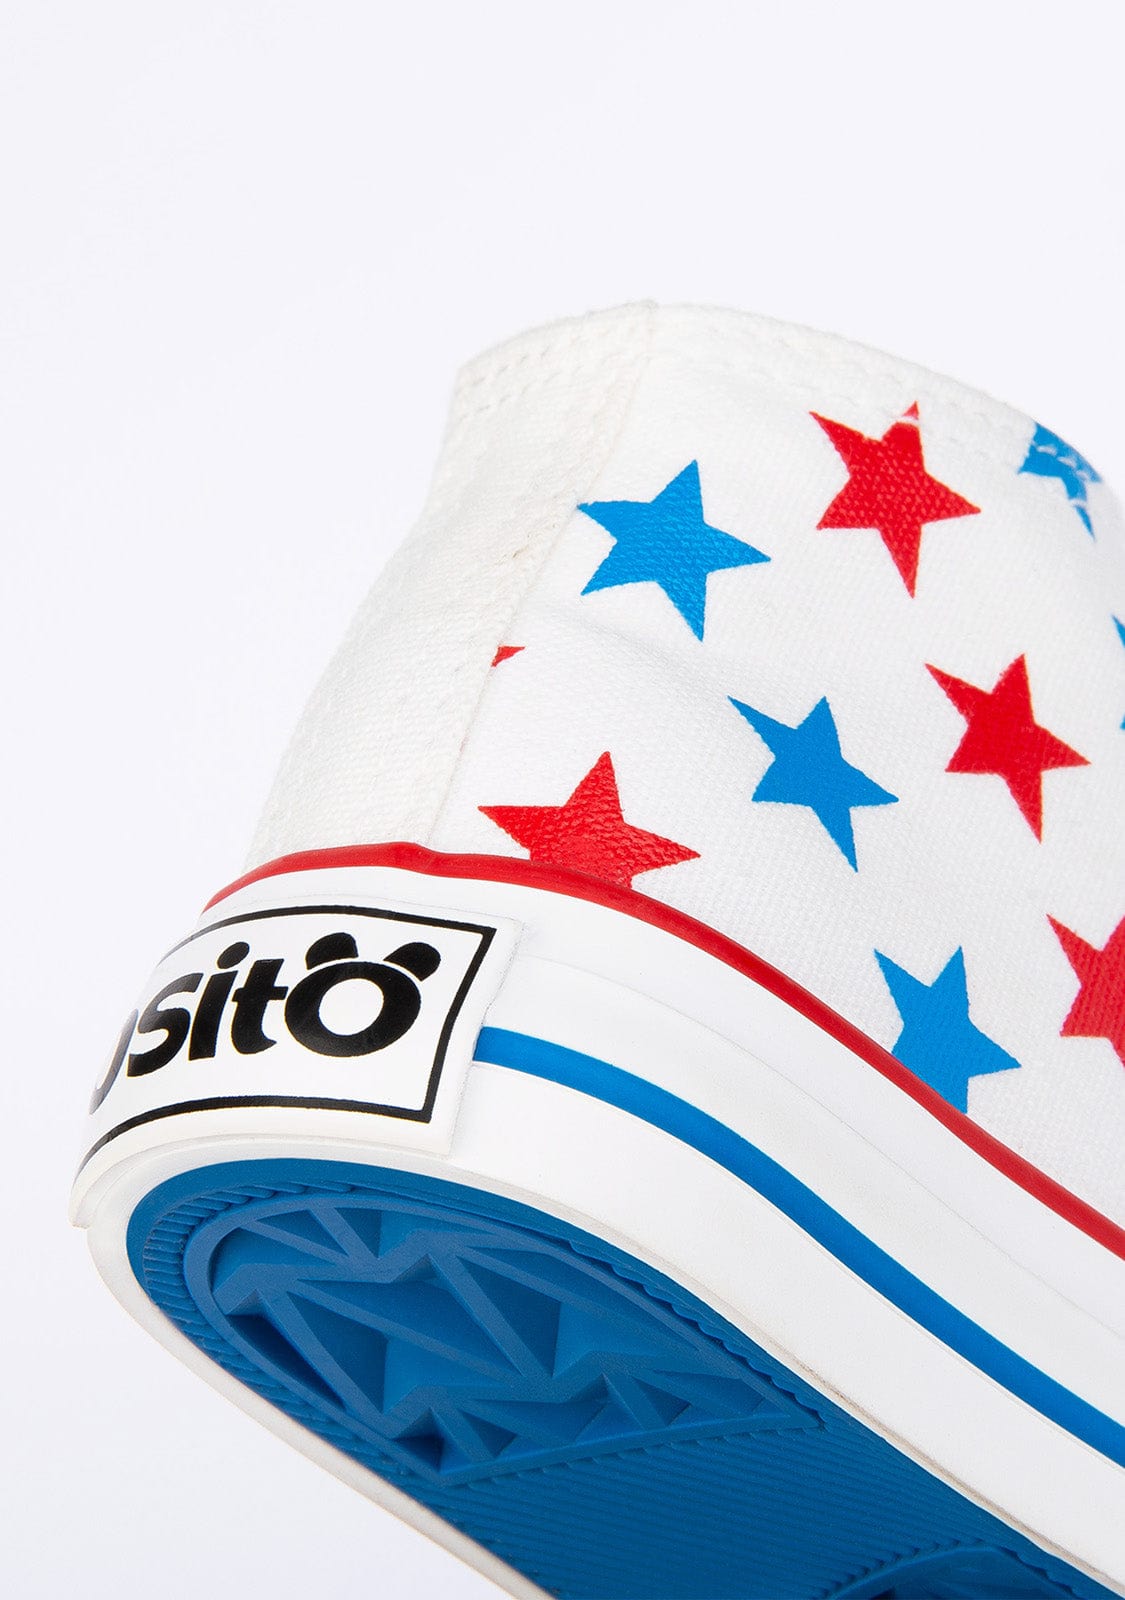 OSITO Shoes Baby's Stars Canvas Hi-Top Sneakers